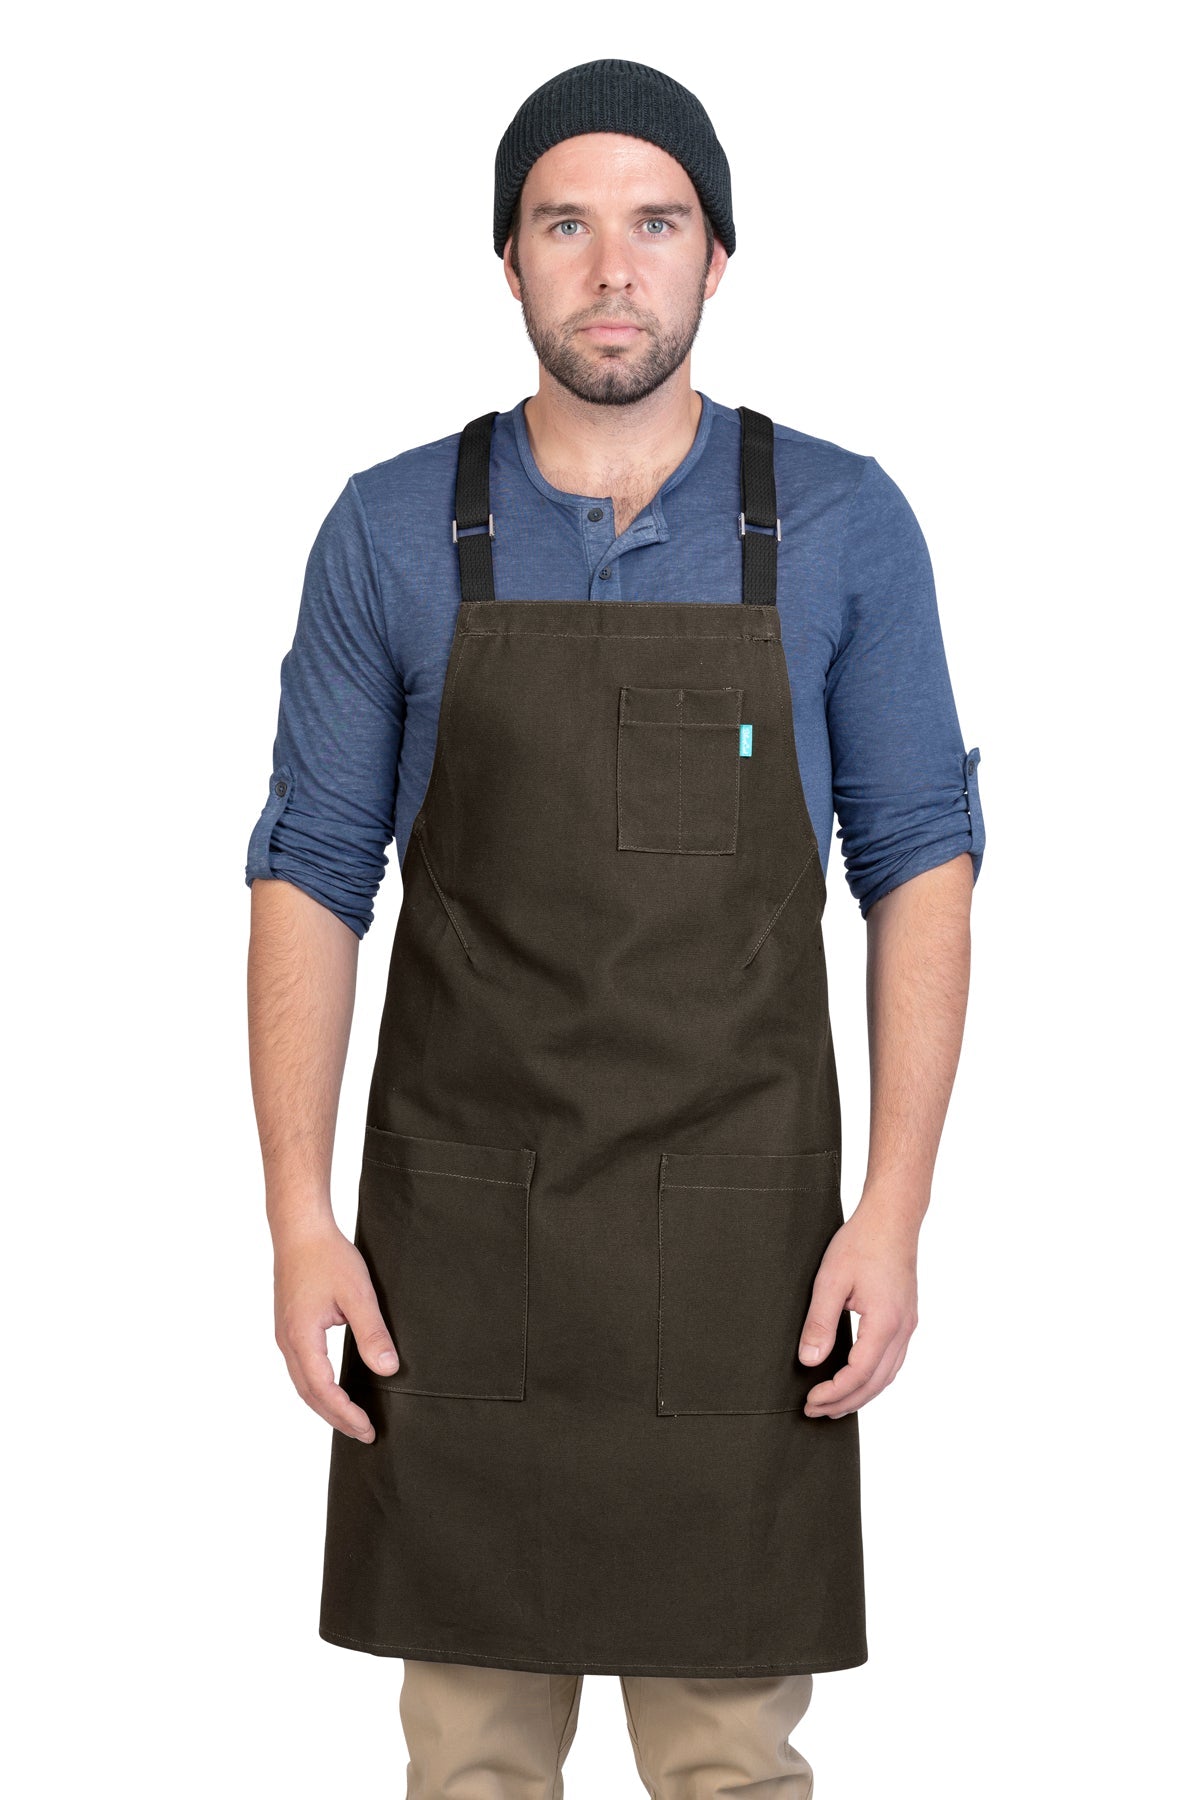 Image of person wearing Lucca Crossback Apron in Dark Brown Canvas. | BlueCut Aprons				